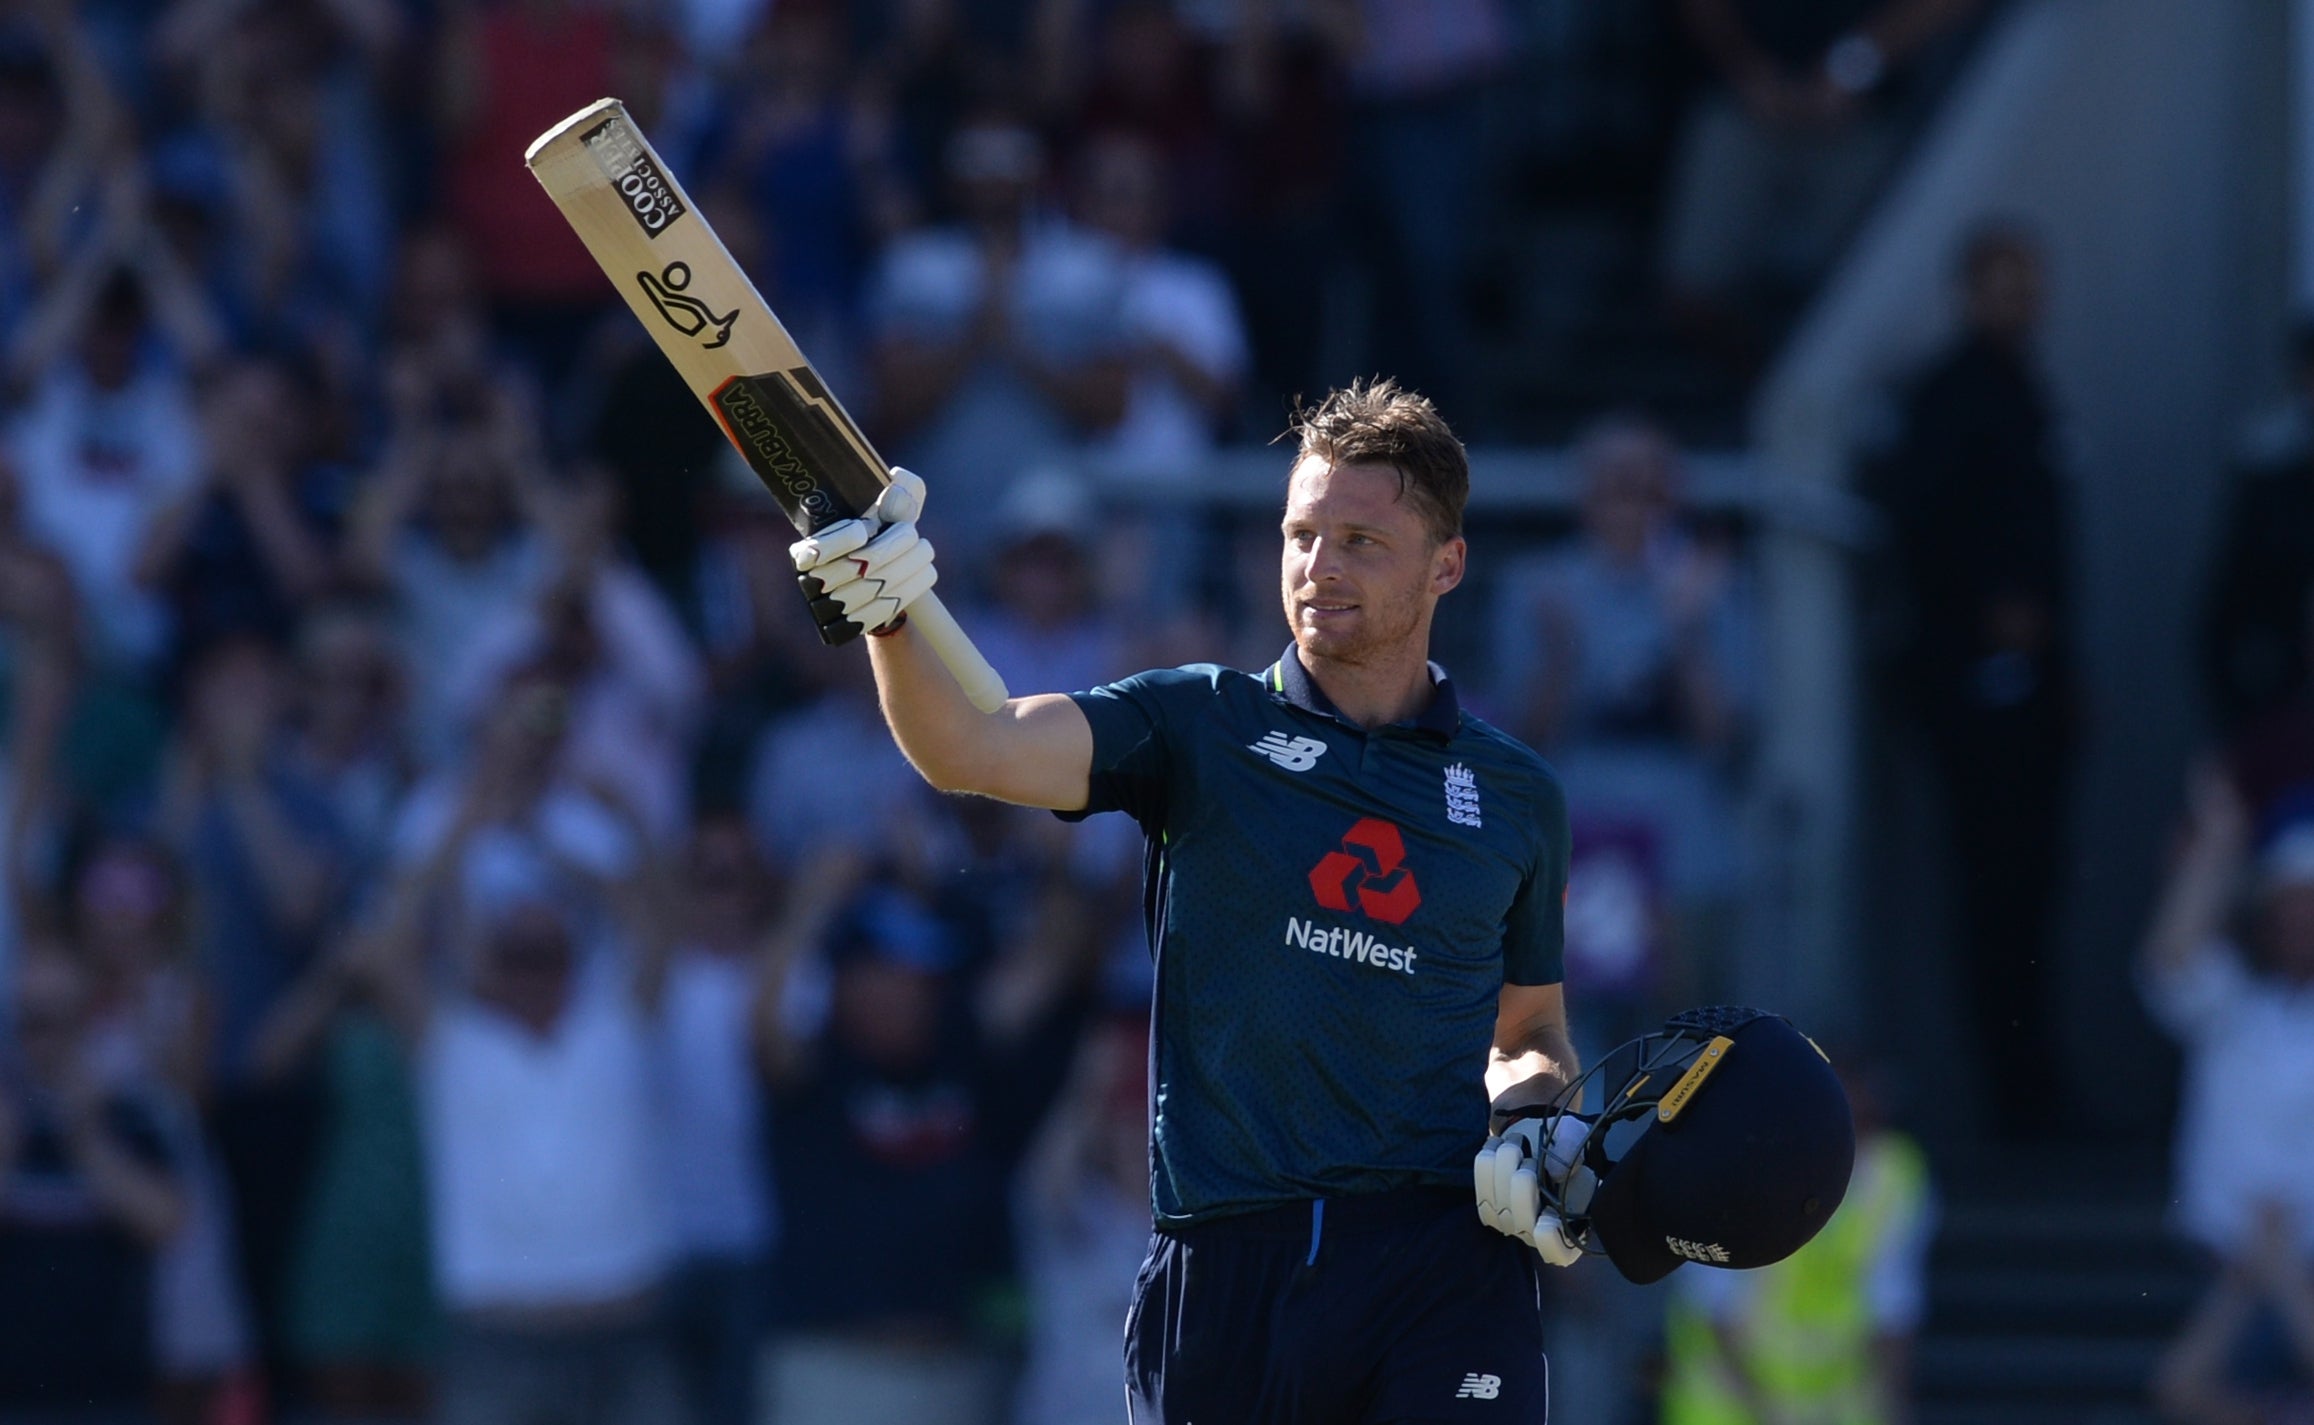 Fabrace wants Buttler to be involved (